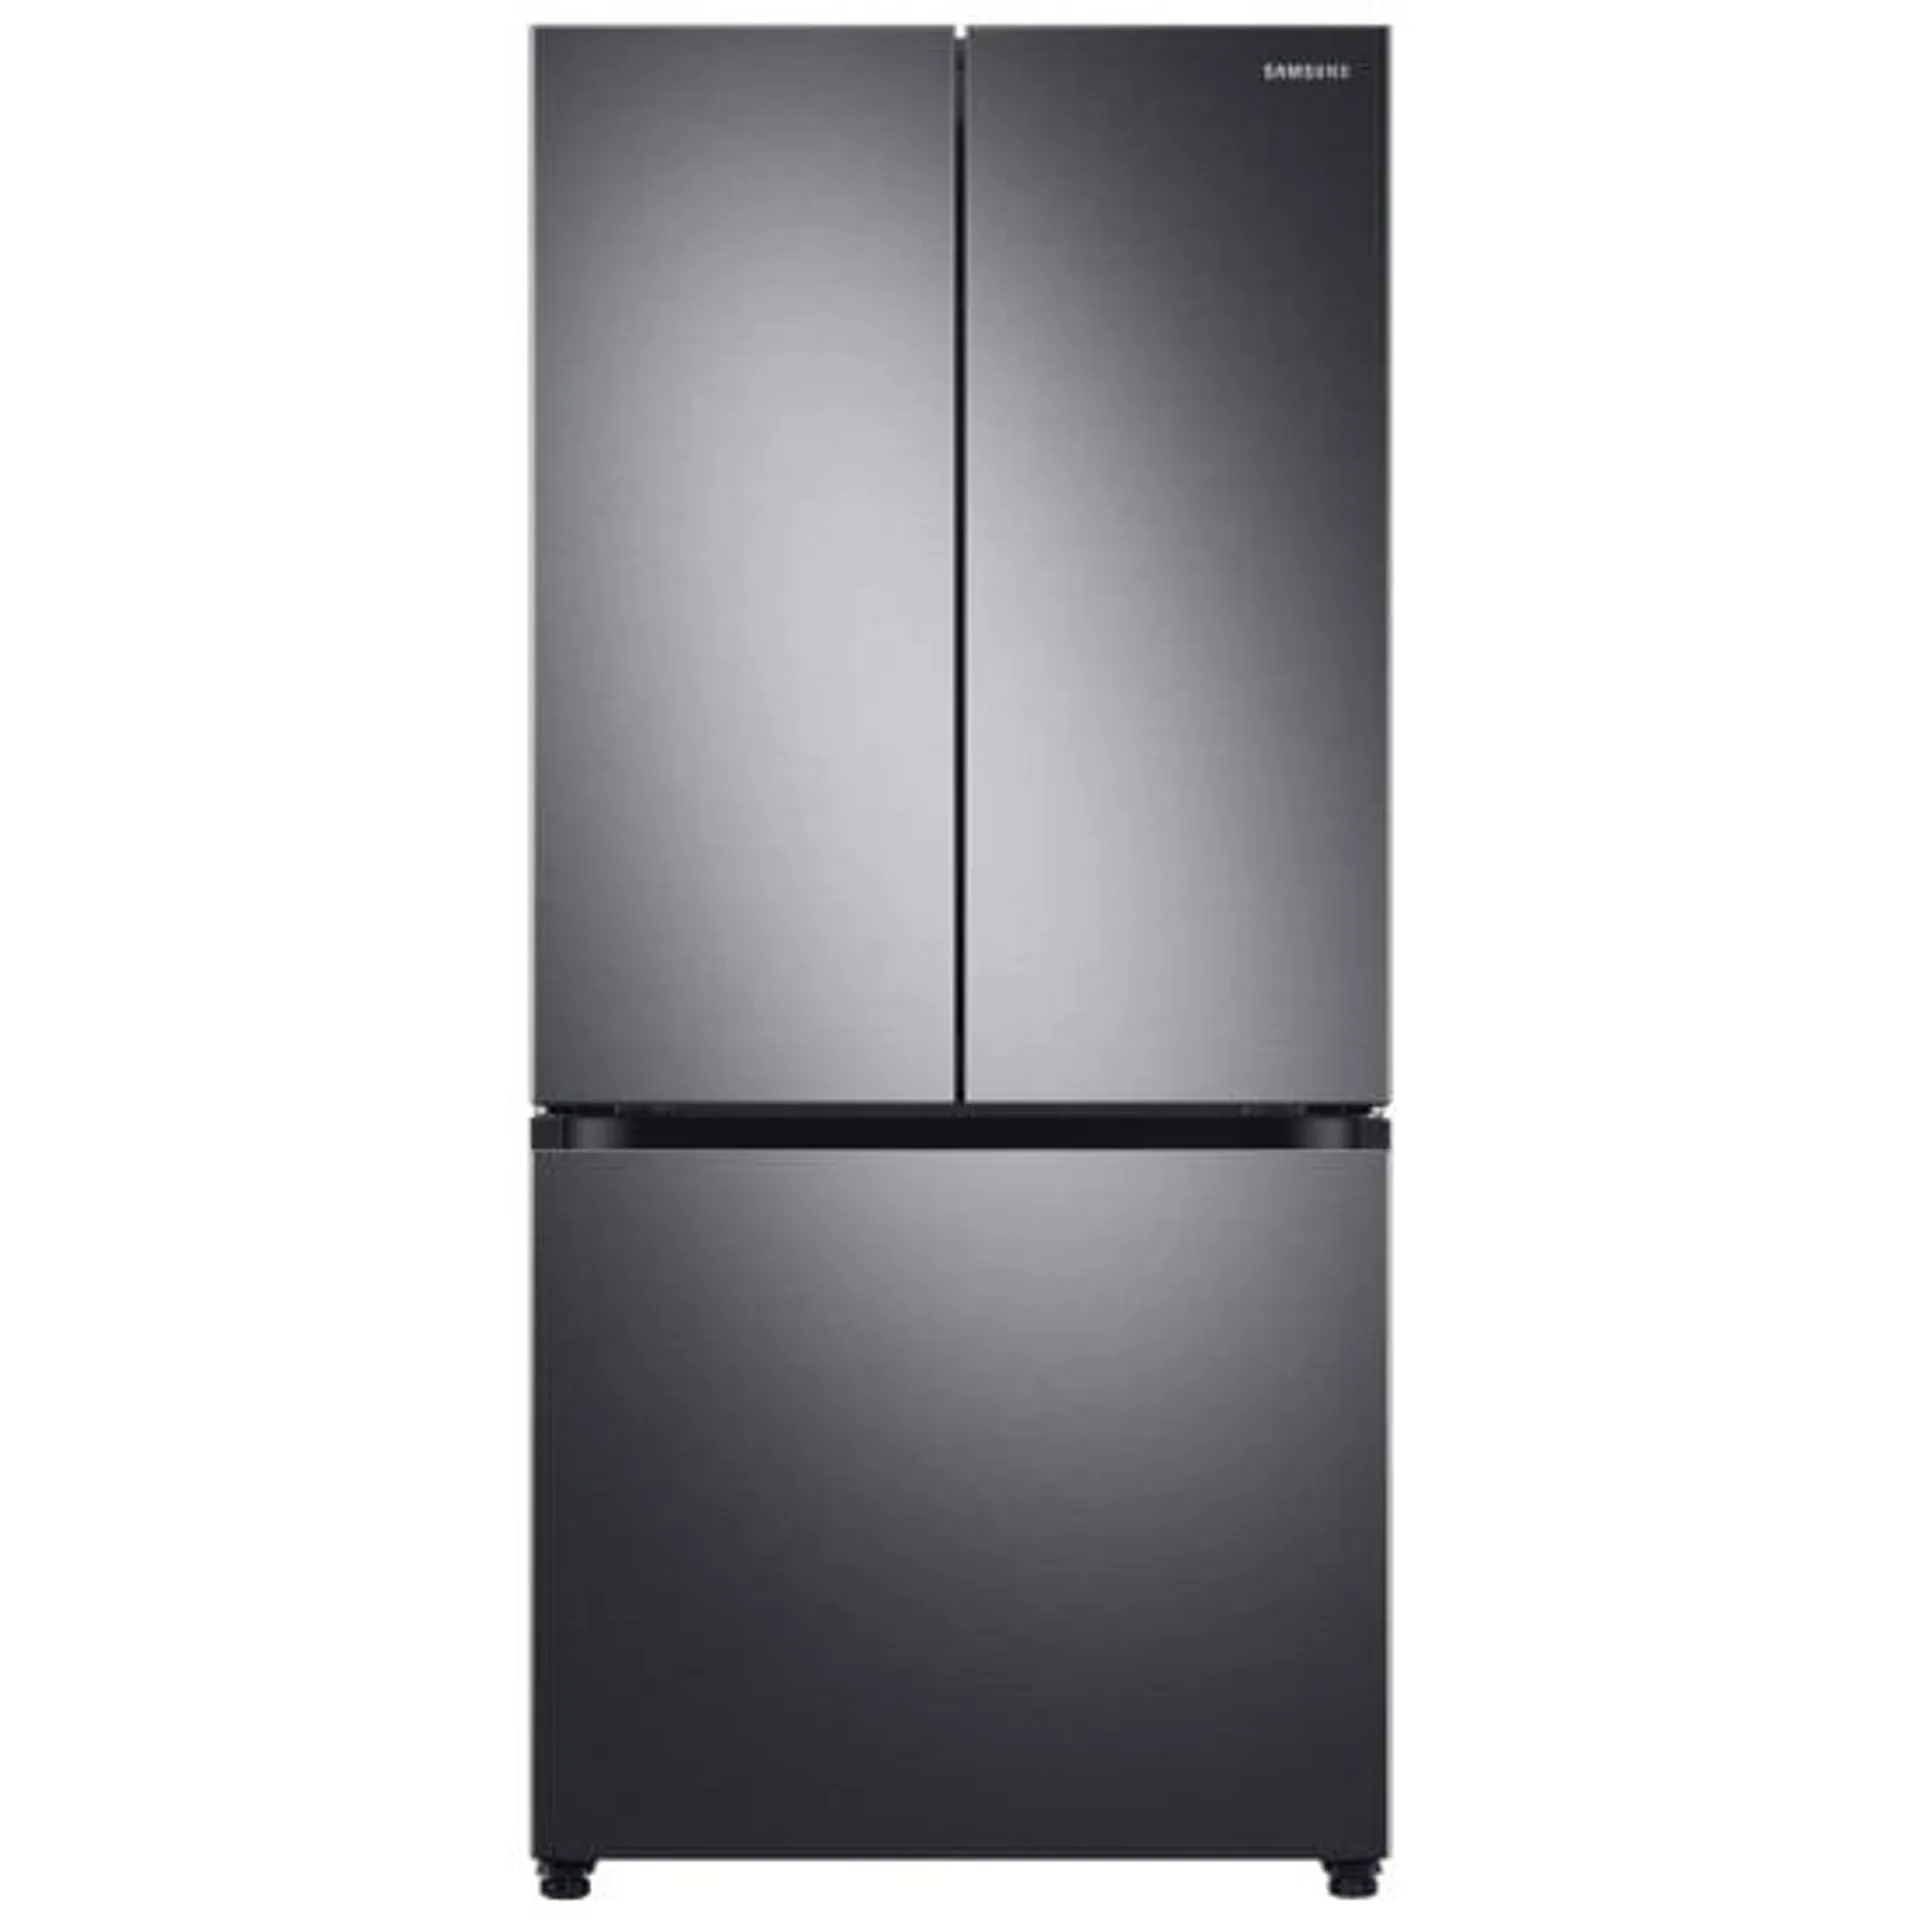 Samsung RF25C5551SG - RF25C5551SG/AA French Door Refrigerator, 33 inch Width, ENERGY STAR Certified, 24.5 cu. ft. Capacity, Black Stainless Steel colour Internal Beverage Center, Dual Ice Maker, AutoFill Water Pitcher